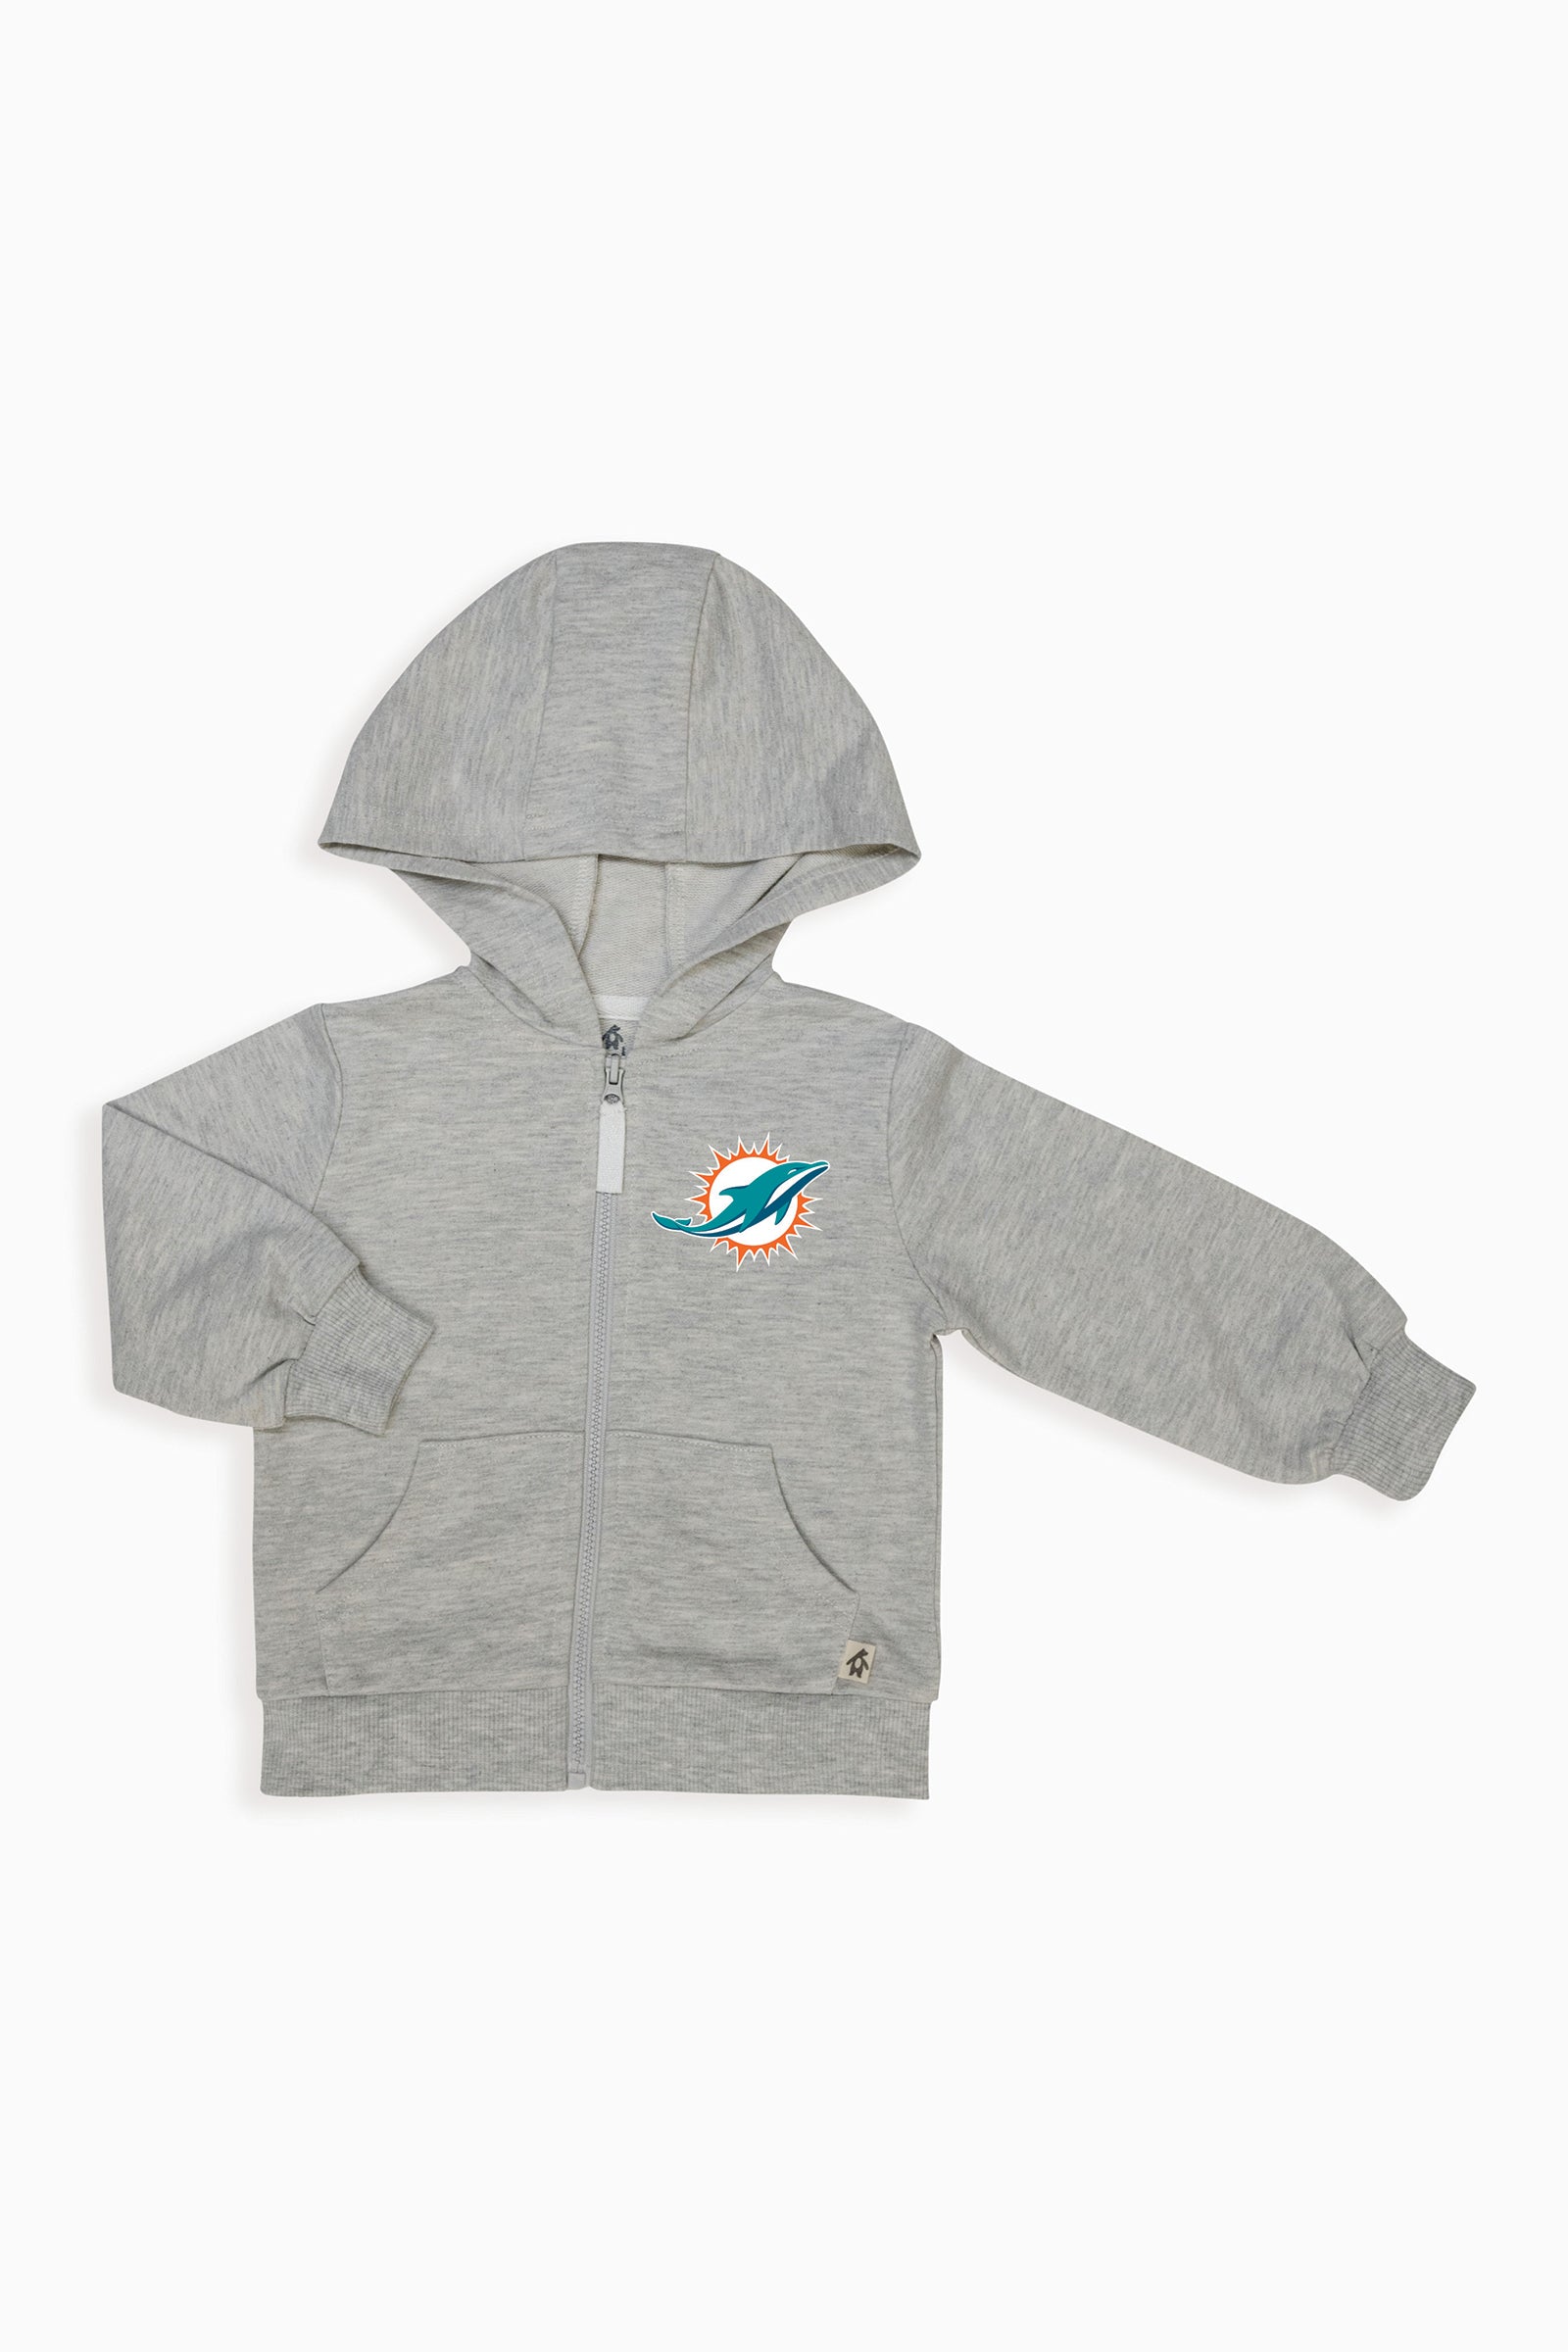 NFL Baby Grey French Terry Zip-Up Hoodie